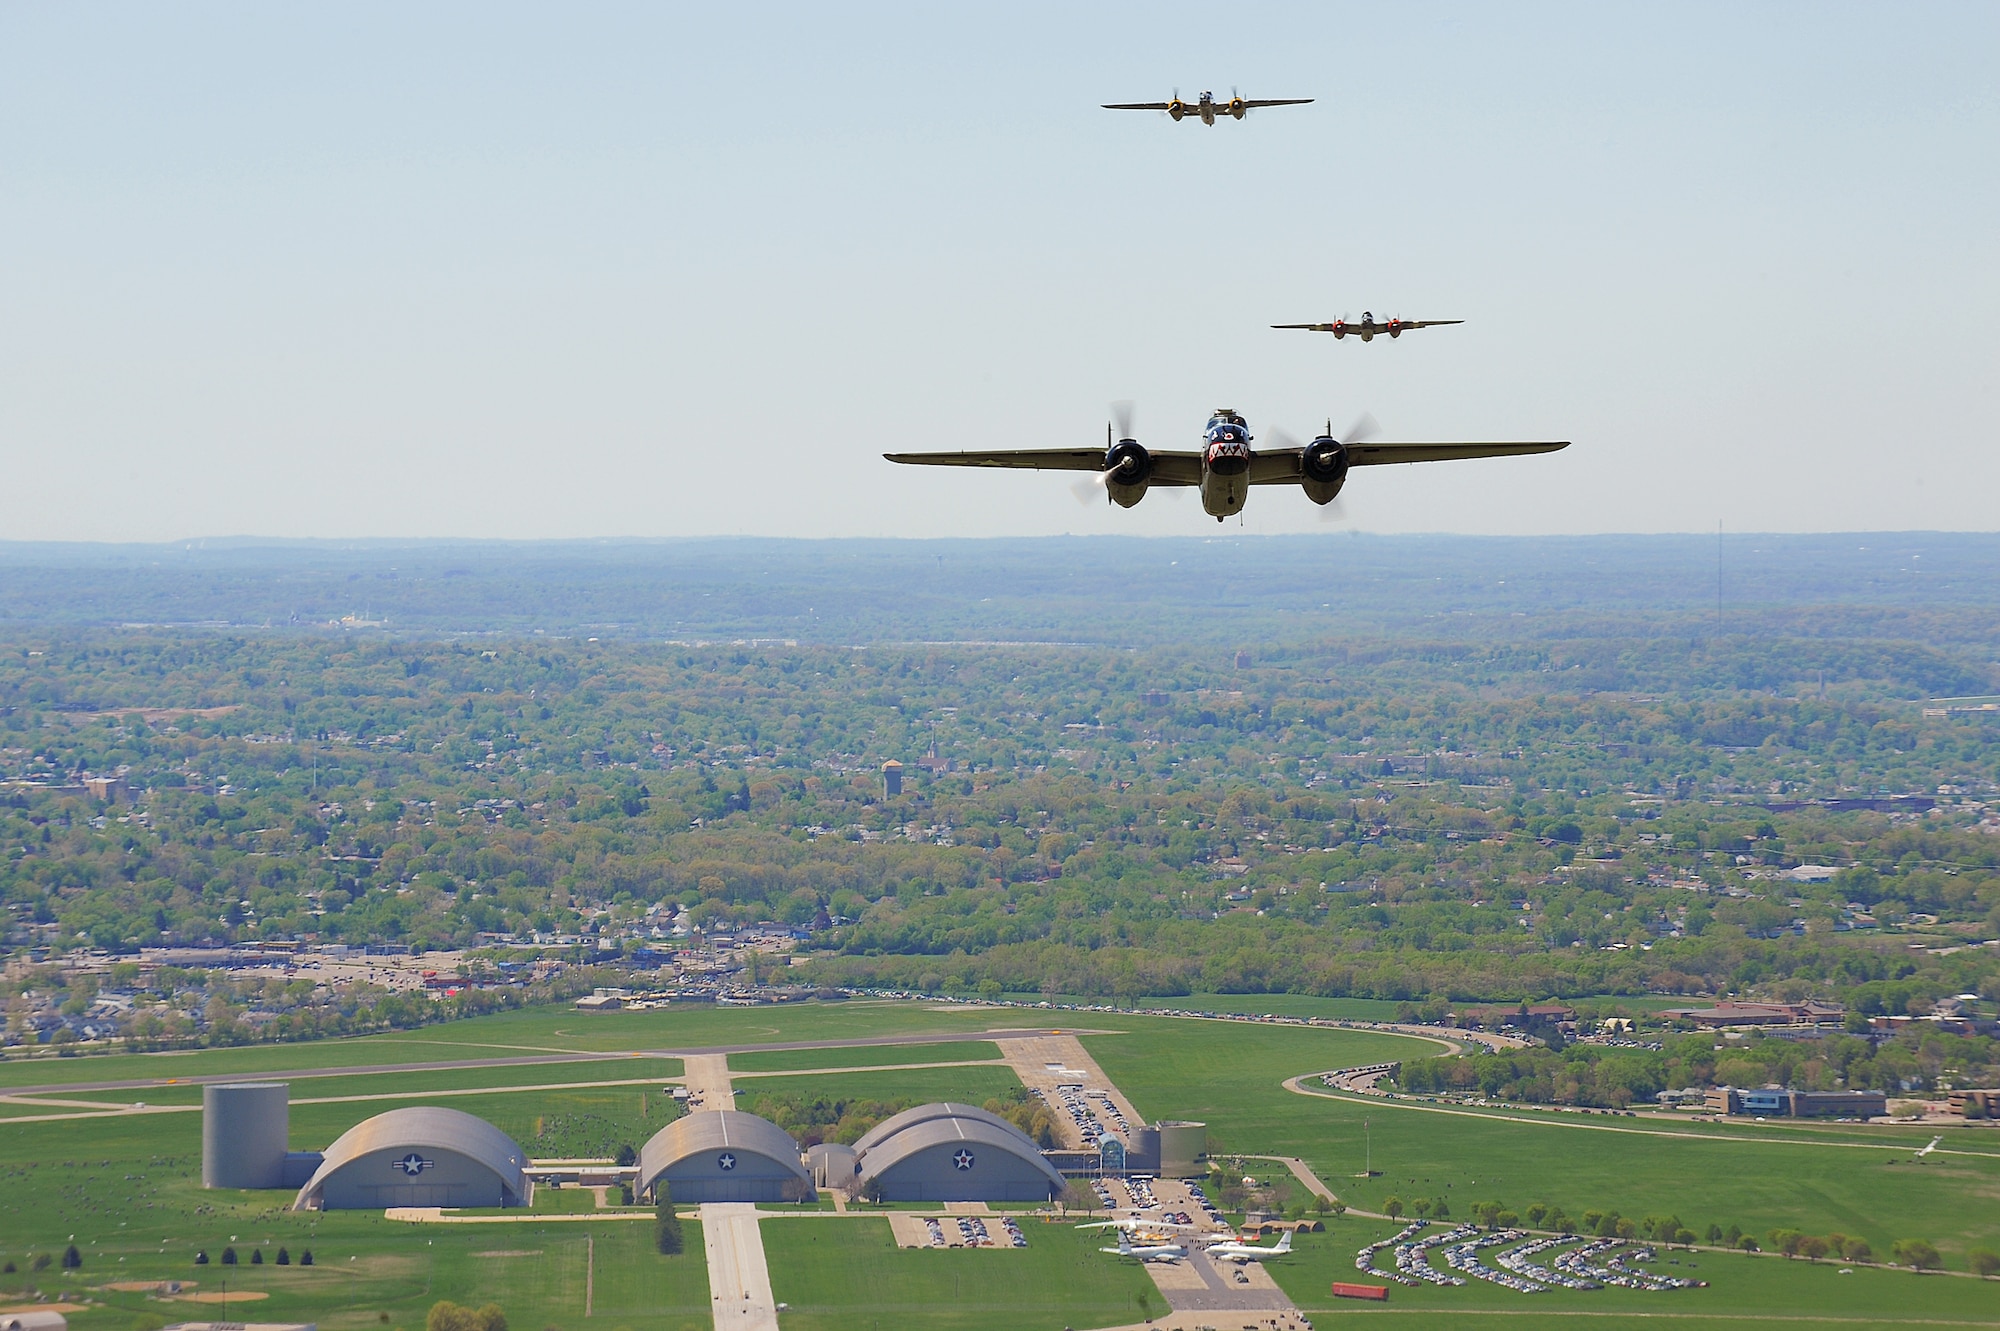 Vintage B-25 Mitchell bombers fly over the National Museum of the U.S. Air Force at Wright-Patterson Air Force Base, Ohio, during a memorial flight honoring the Doolittle Tokyo Raiders on April 18, 2010.  The 68th Doolittle Raiders' reunion commemorates the anniversary of the Doolittle Tokyo Raid.  On April 18, 1942, U.S. Army Air Forces Lt. Col. Jimmy Doolittle's squad of 16 B-25 Mitchell aircraft bombed Japanese targets in response to the attack on Pearl Harbor. (U.S. Air Force photo/Tech. Sgt. Jacob N. Bailey)


